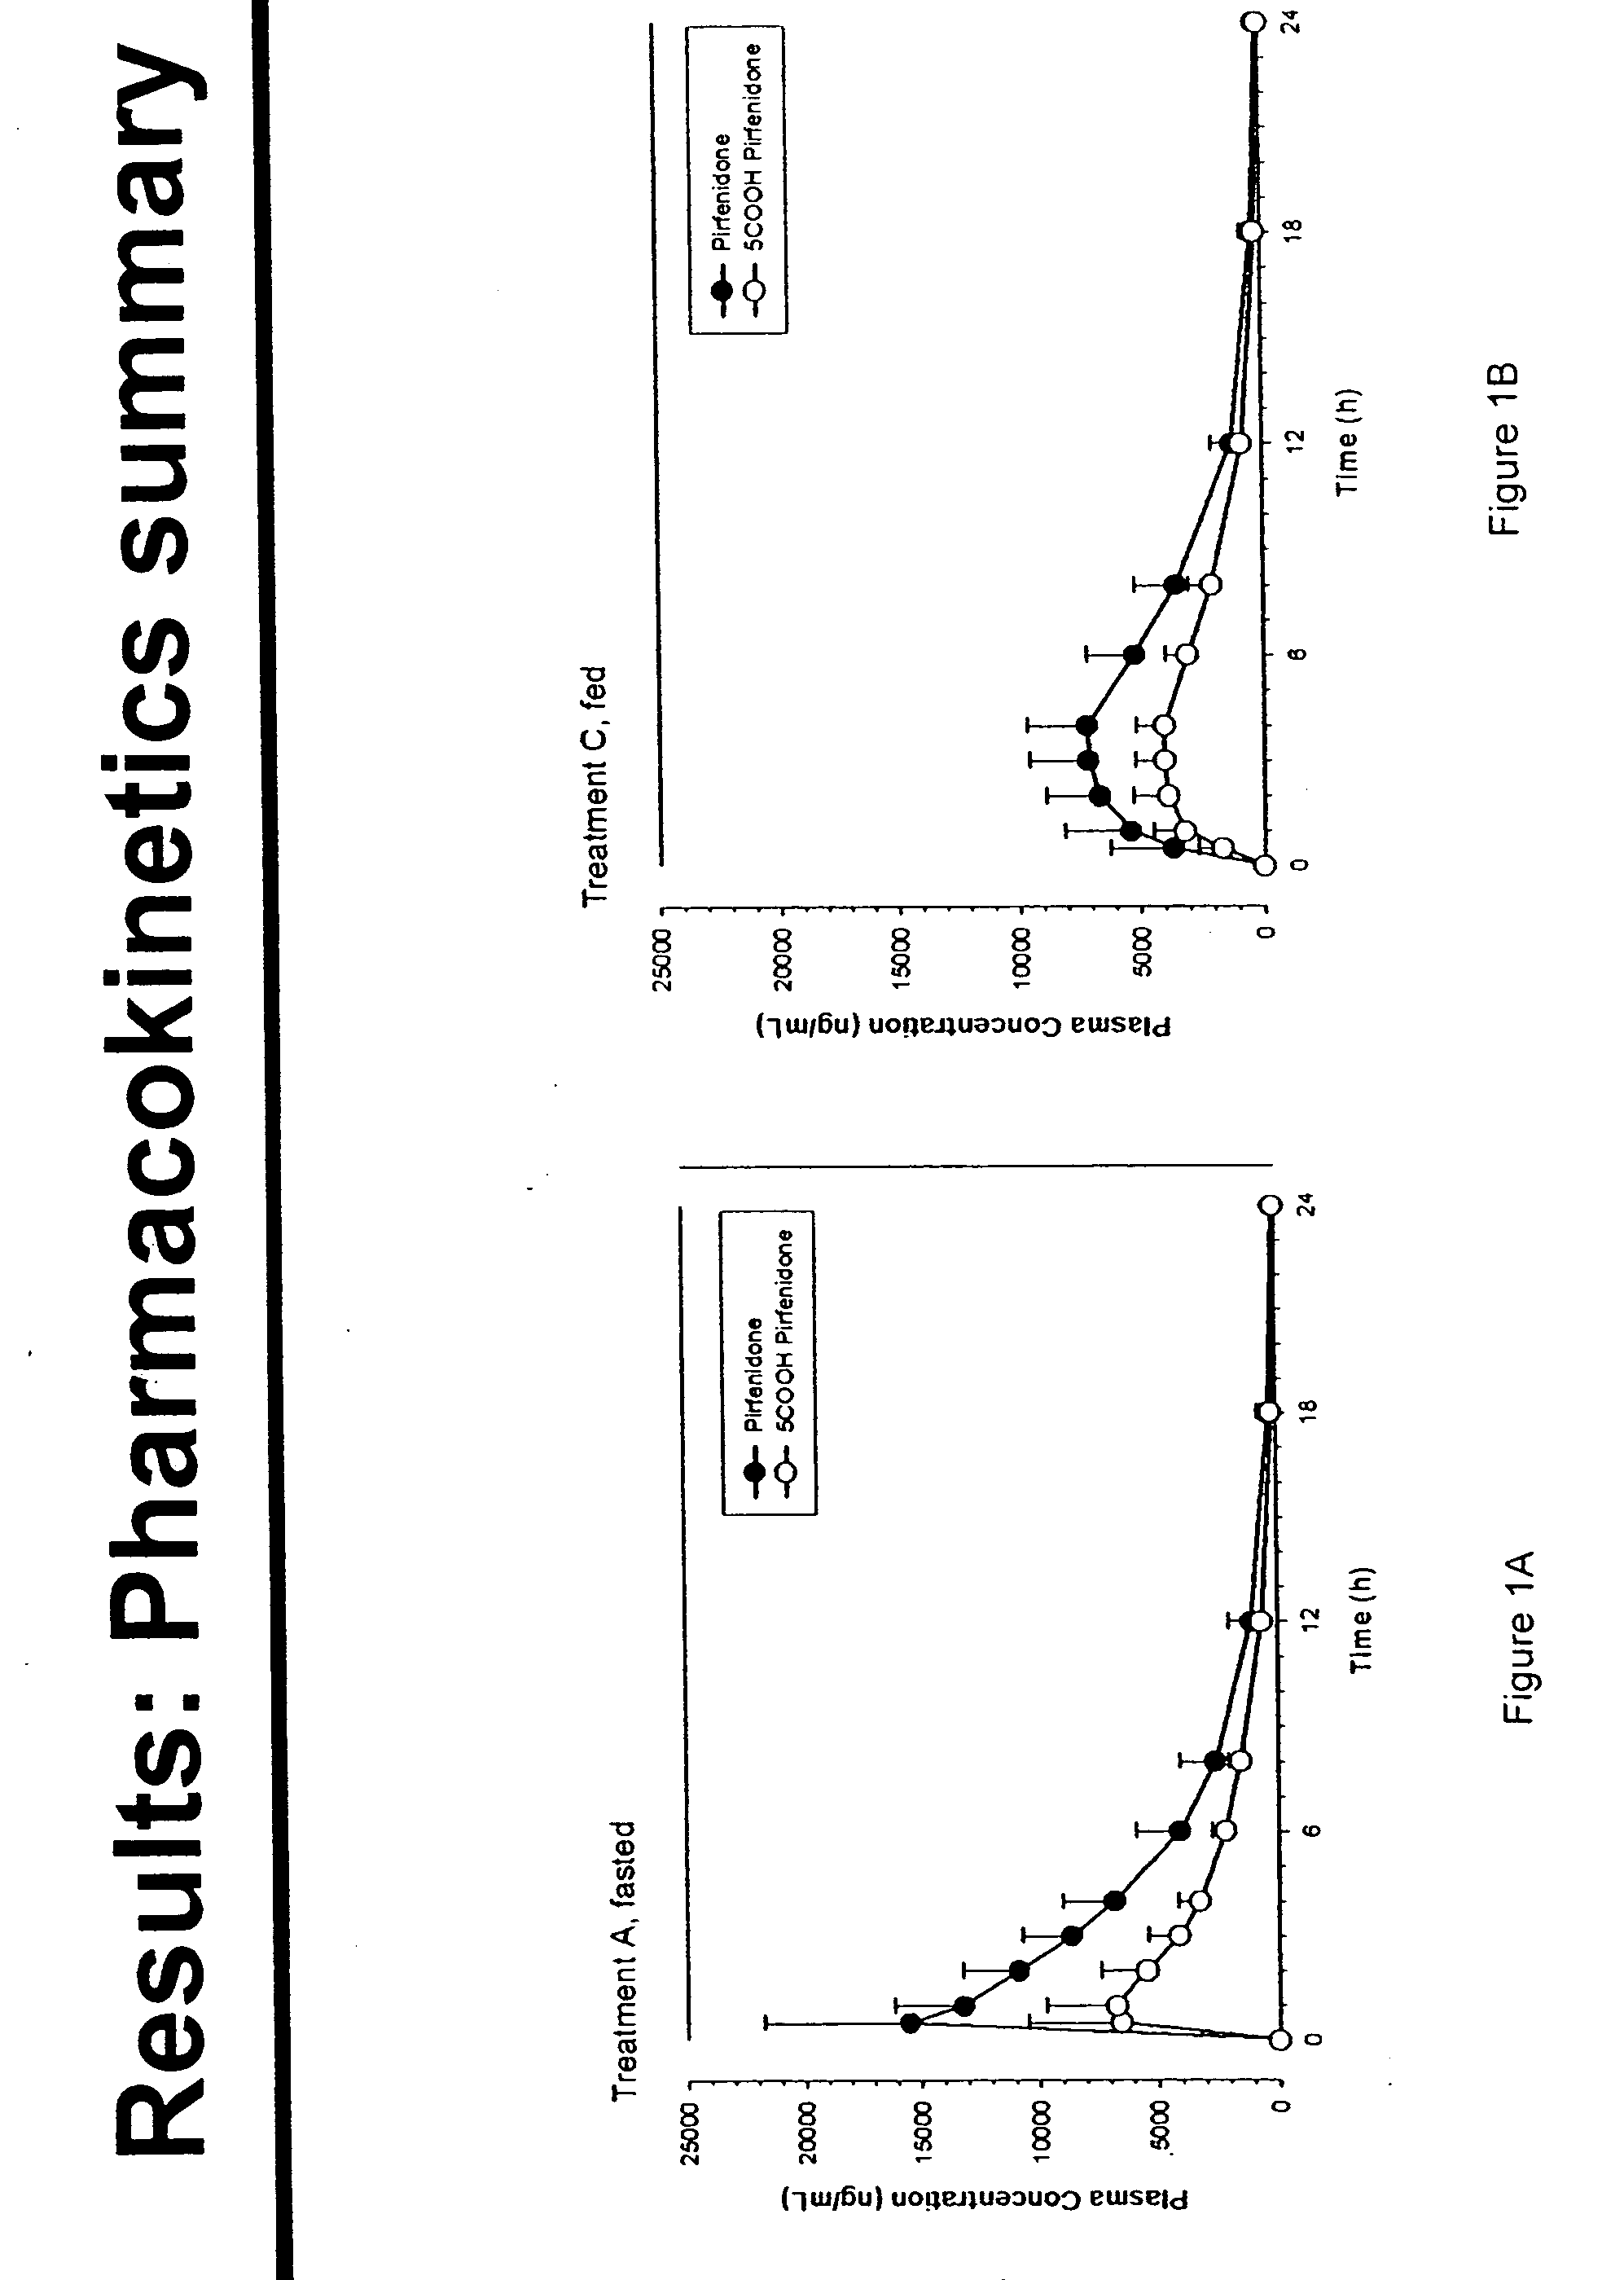 Methods of reducing adverse events associated with pirfenidone therapy